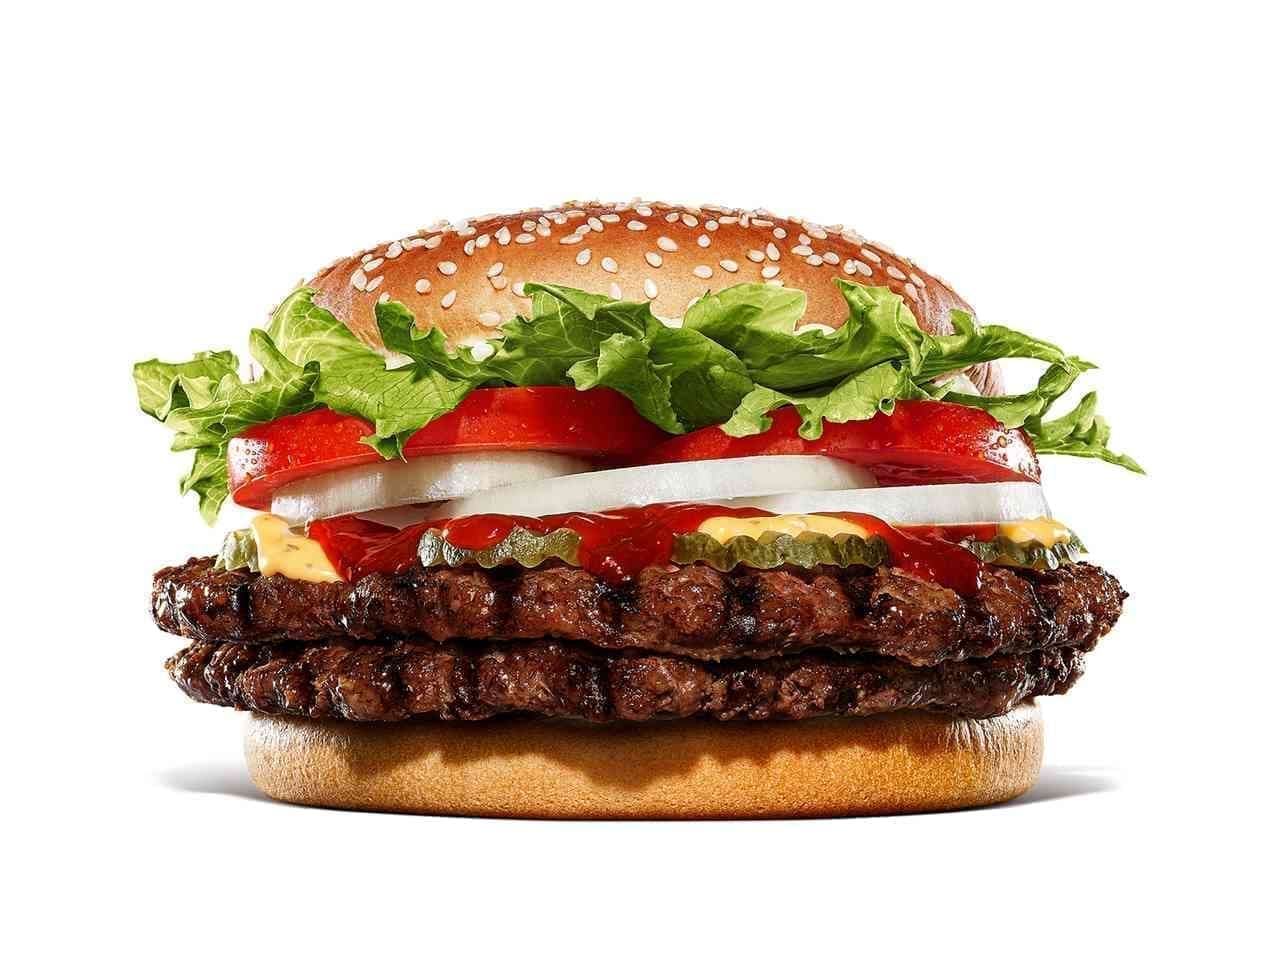 Burger King "Spicy Double Whopper Cheese"